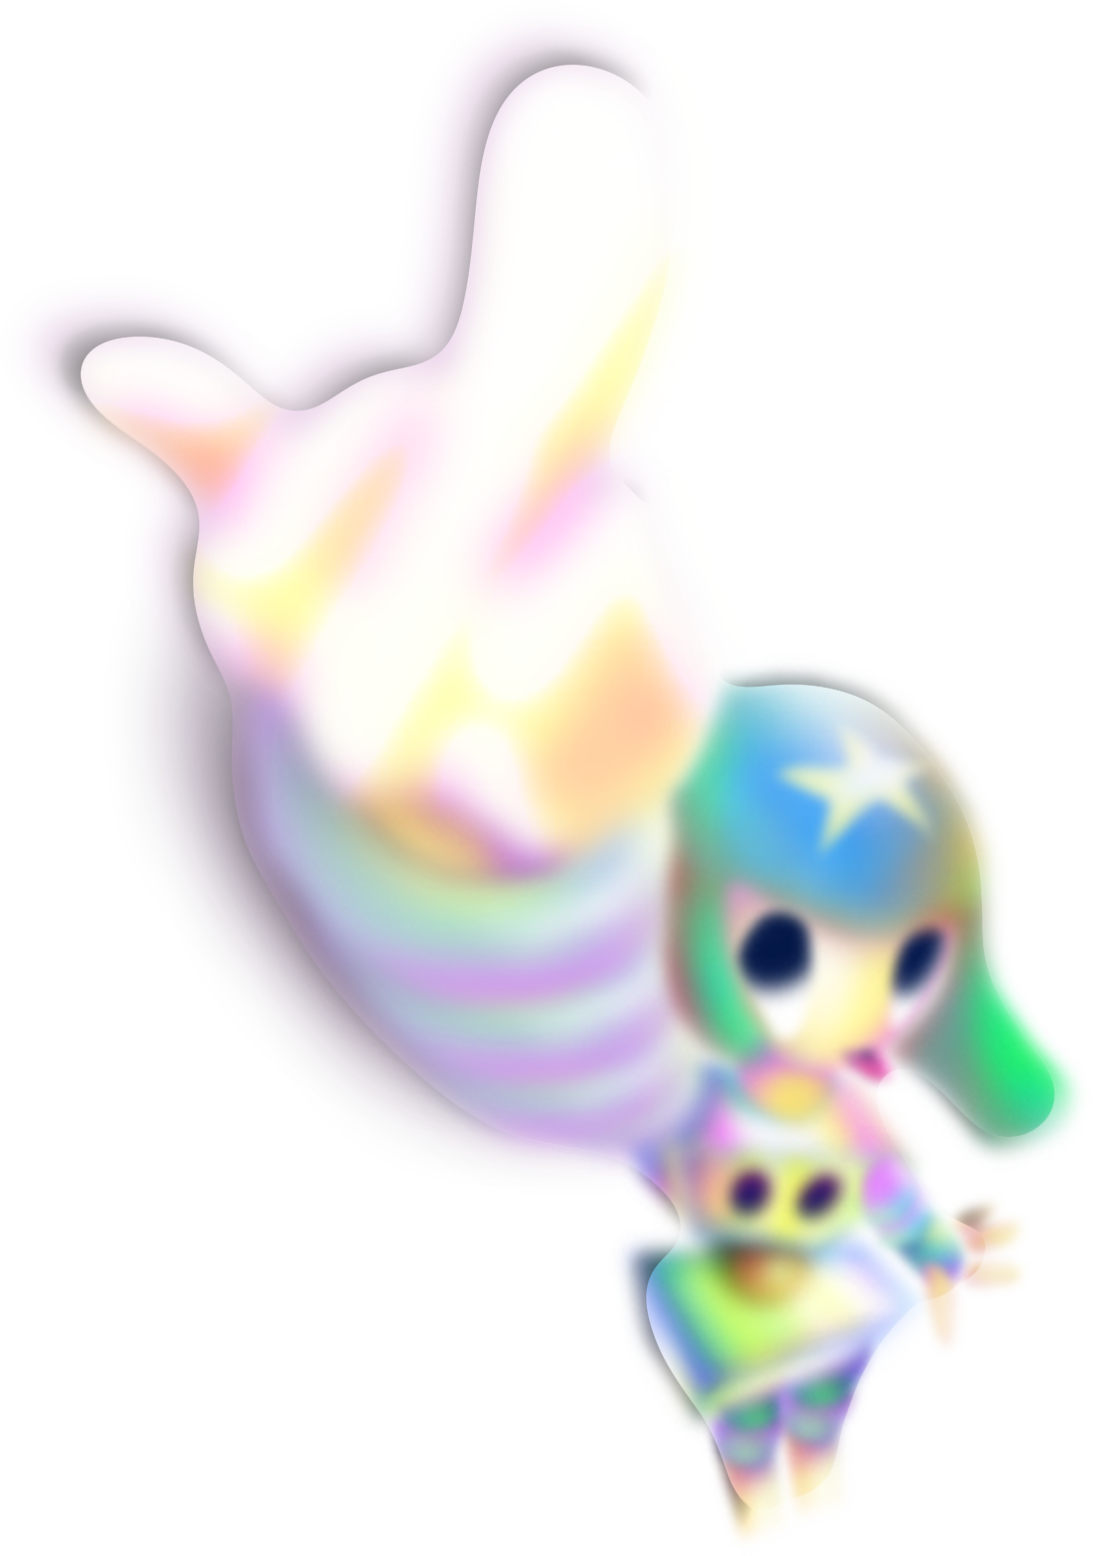 a very cute and colorful CG character seen standing from an overhead perspective with blue and green hat with a white star, big round eyes, and a big striped arm reaching up and giving a middle finger.